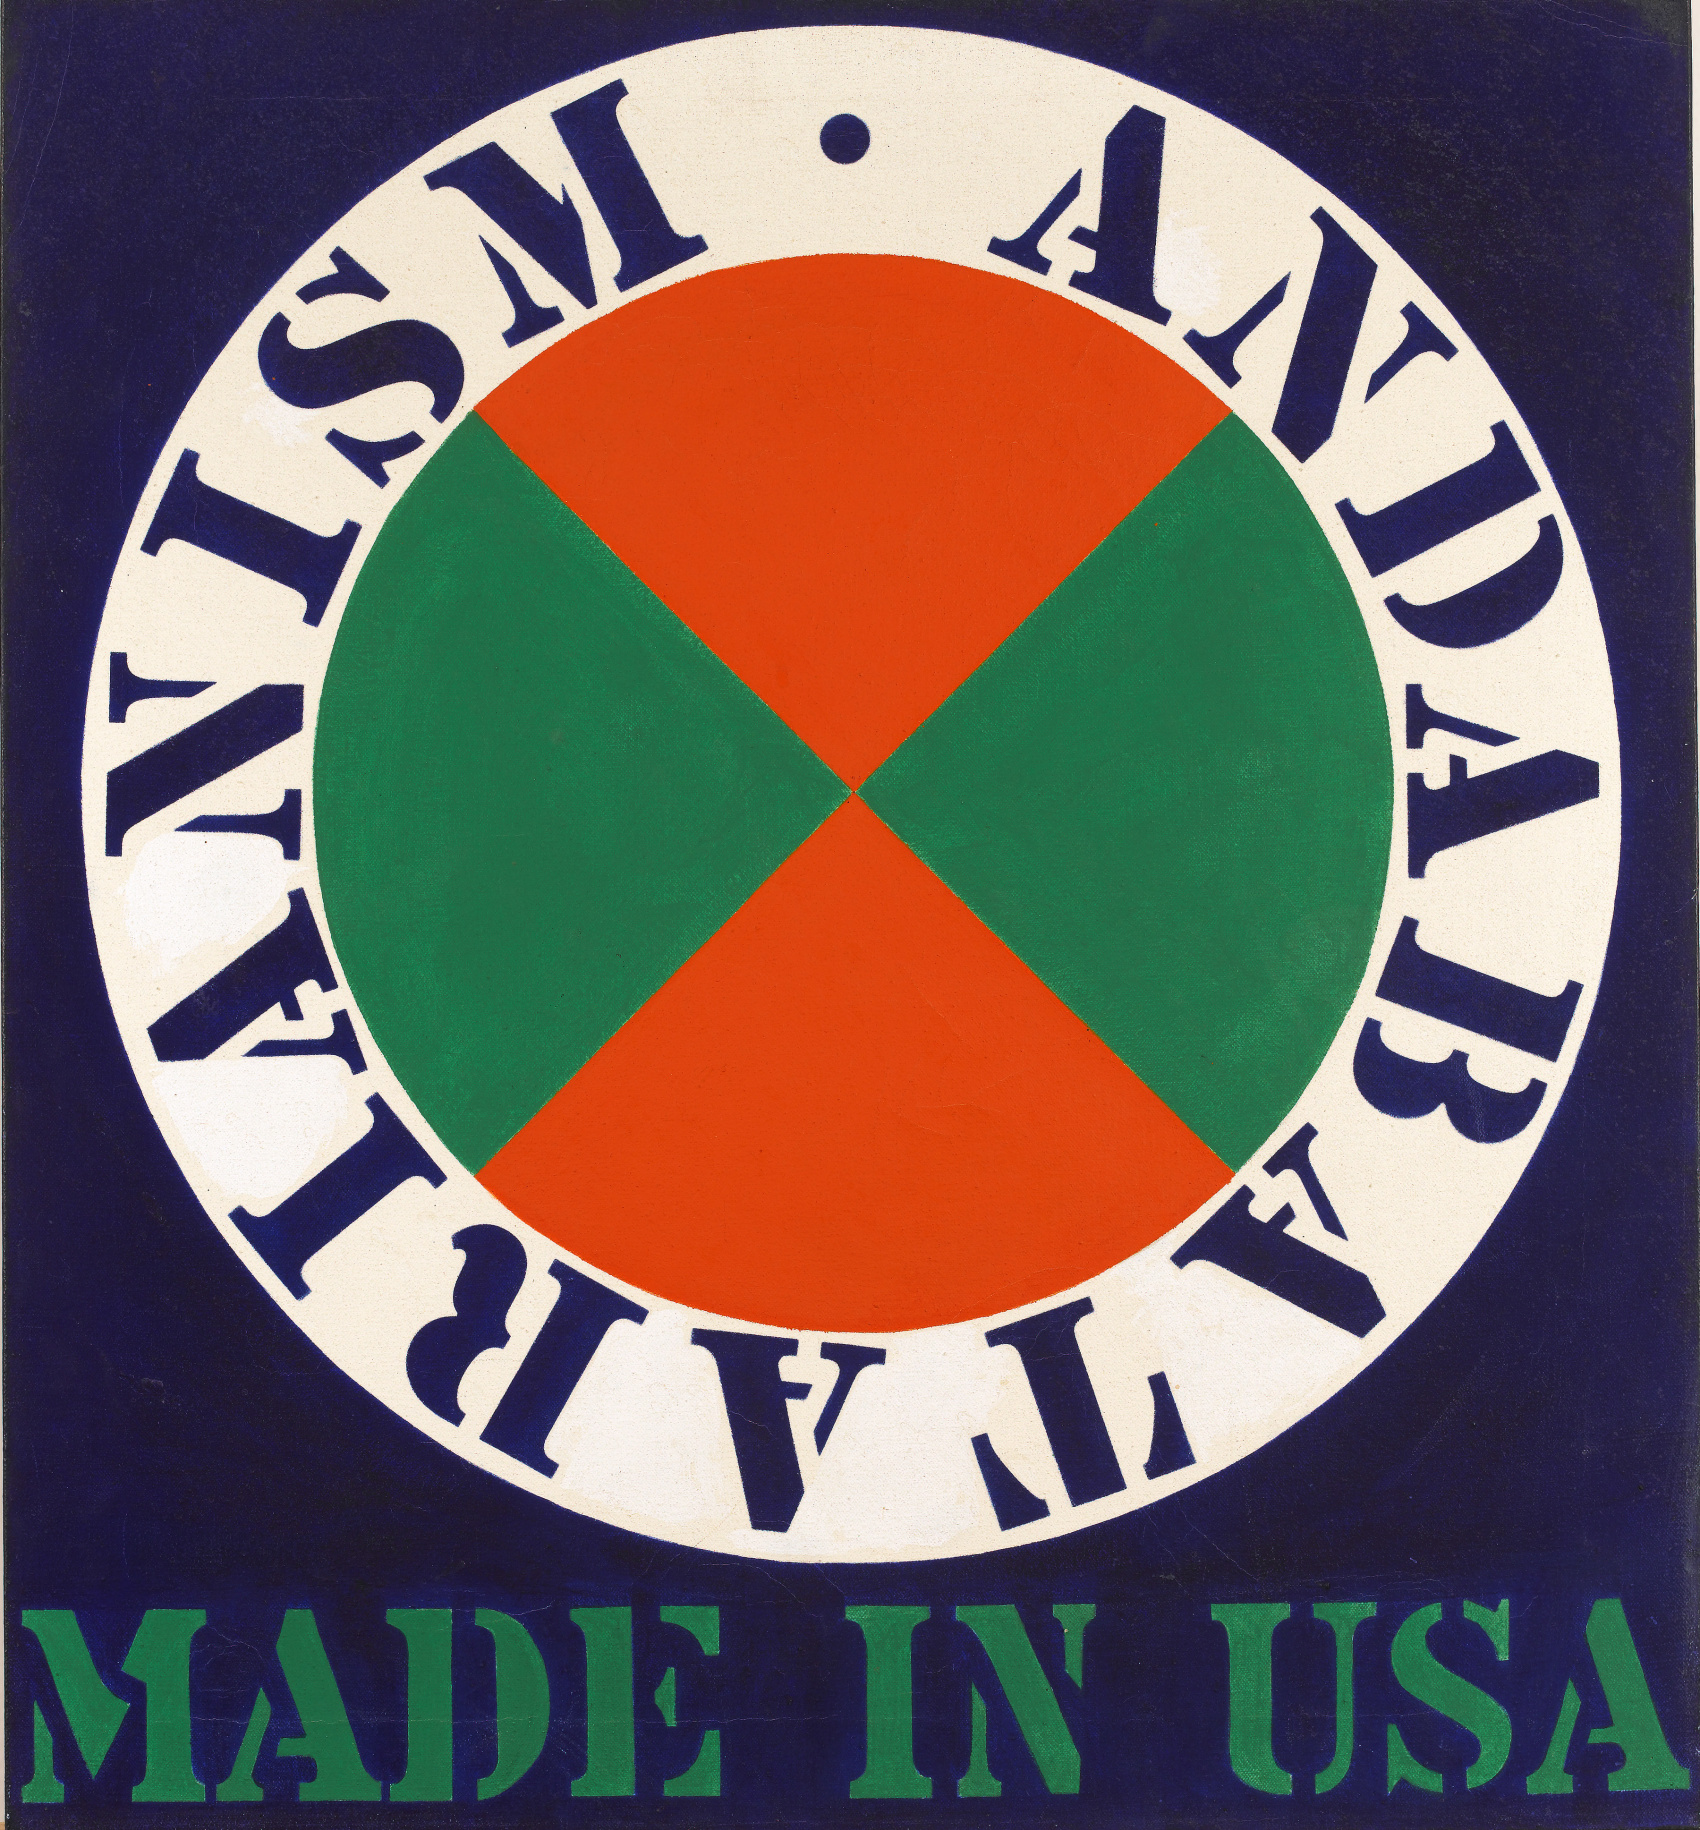 A 24 by 22 inch painting with a circle dominating most of the canvas. The white outer ring of the circle contains blue stenciled text reading &quot;Andabatarianism&quot; and it encloses a design of red and green triangles. The painting's title, Made in USA, appears in green stenciled text across the lower edge of the work.